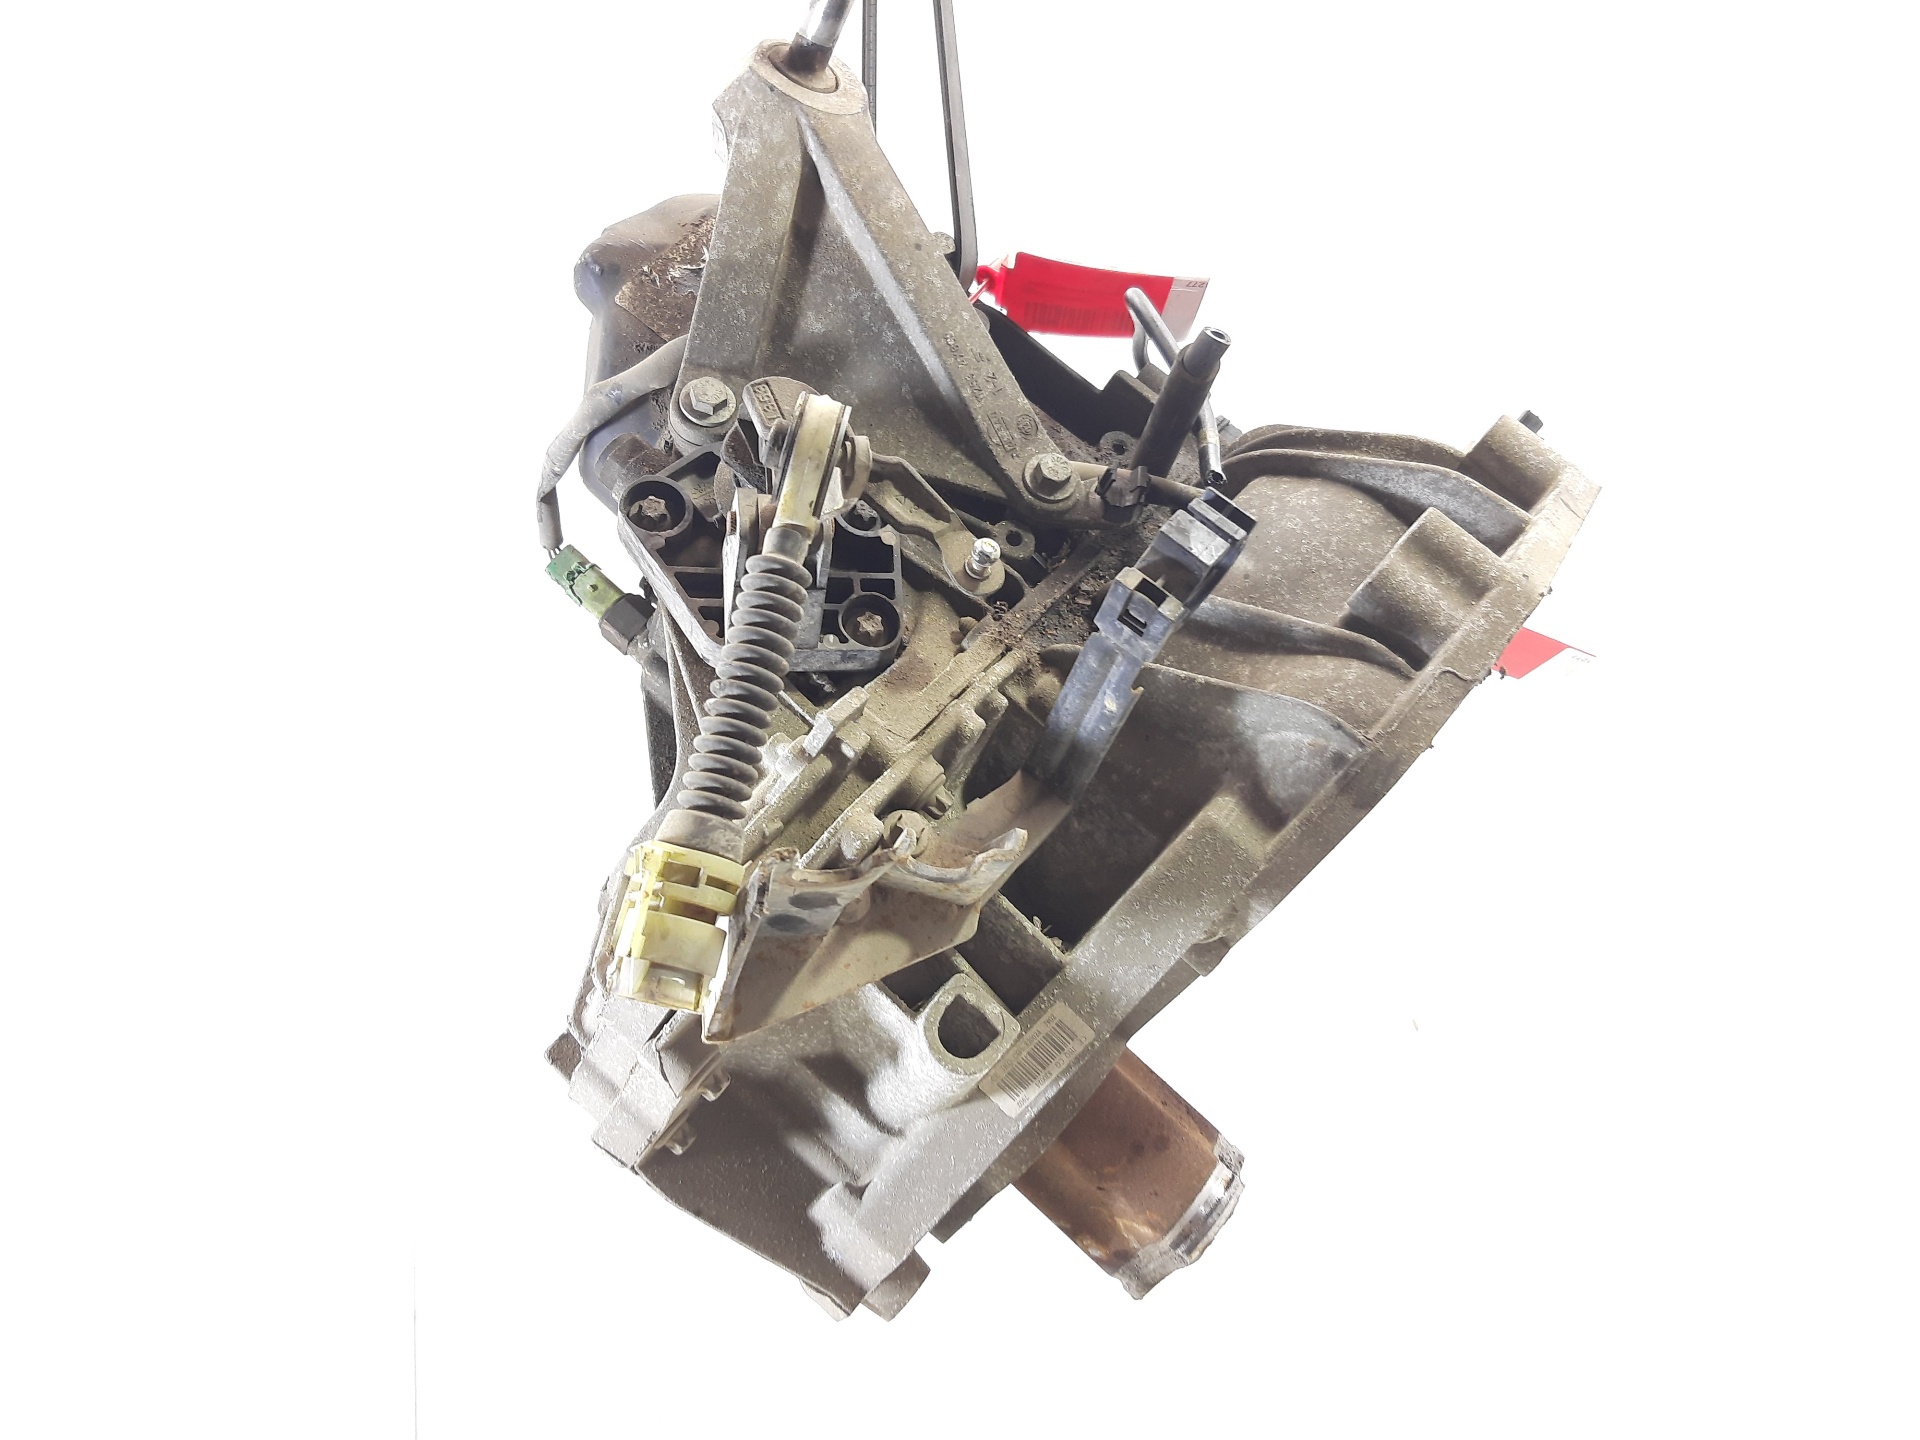 NISSAN Micra K12 (2002-2010) Gearbox JH3103, 5VELOCIDADES 23031854